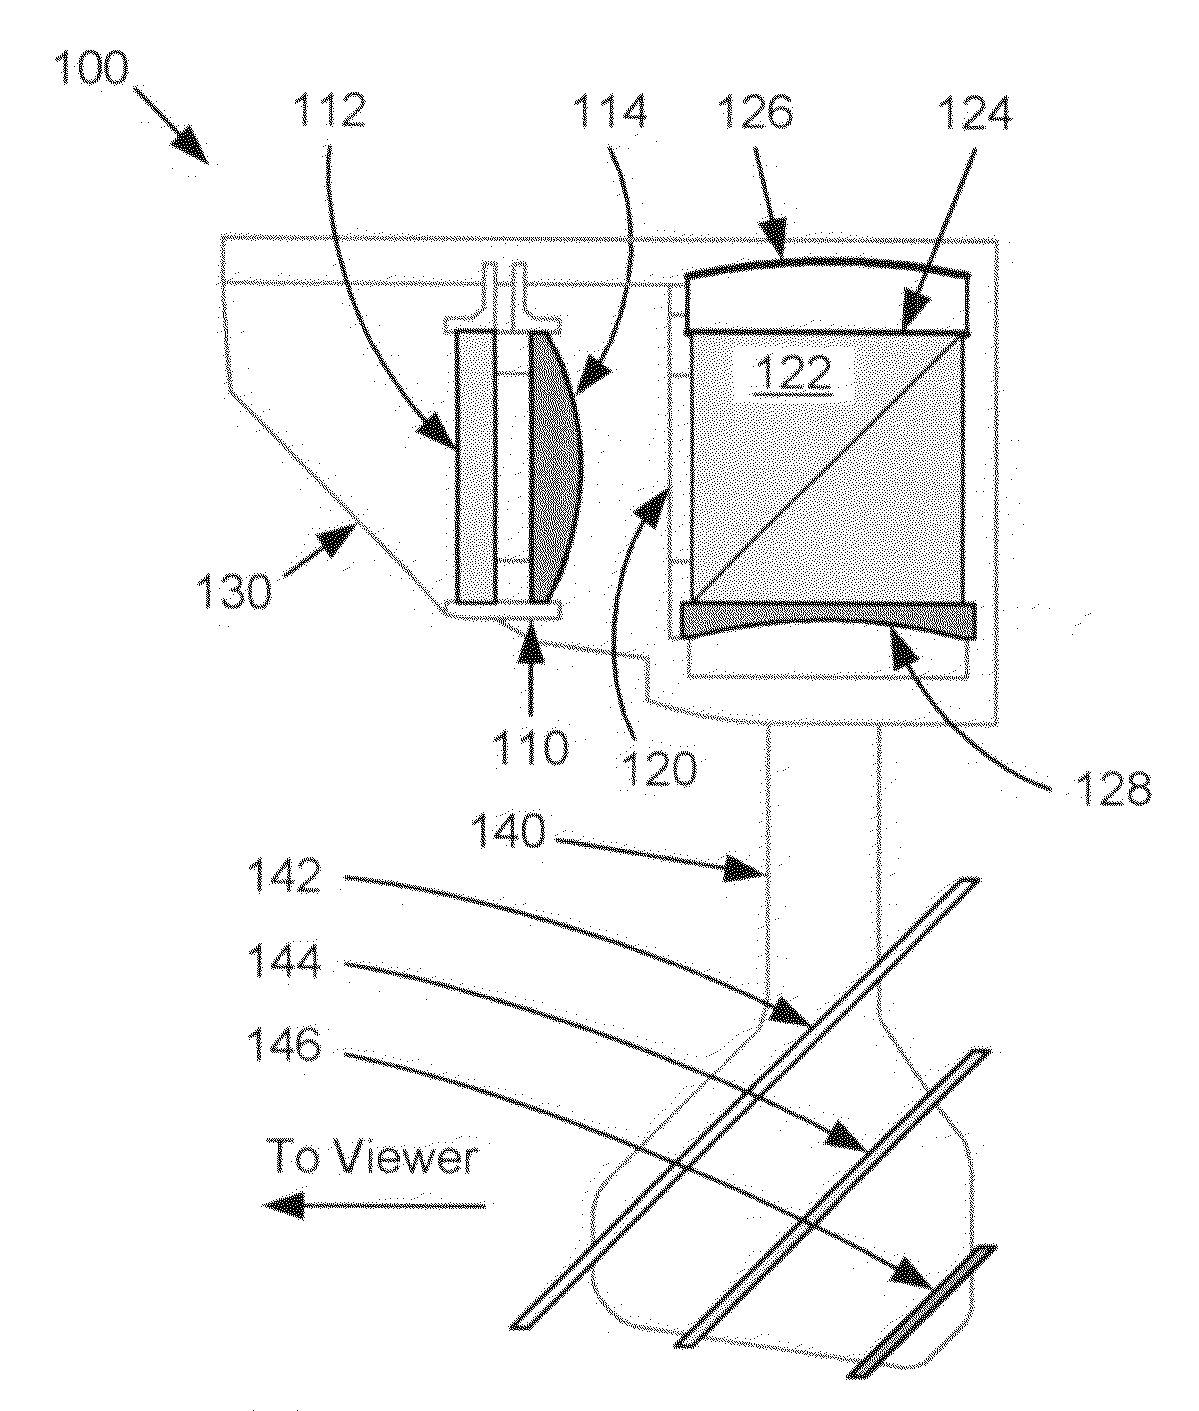 Catadioptric system, apparatus, and method for producing images on a universal, head-up display